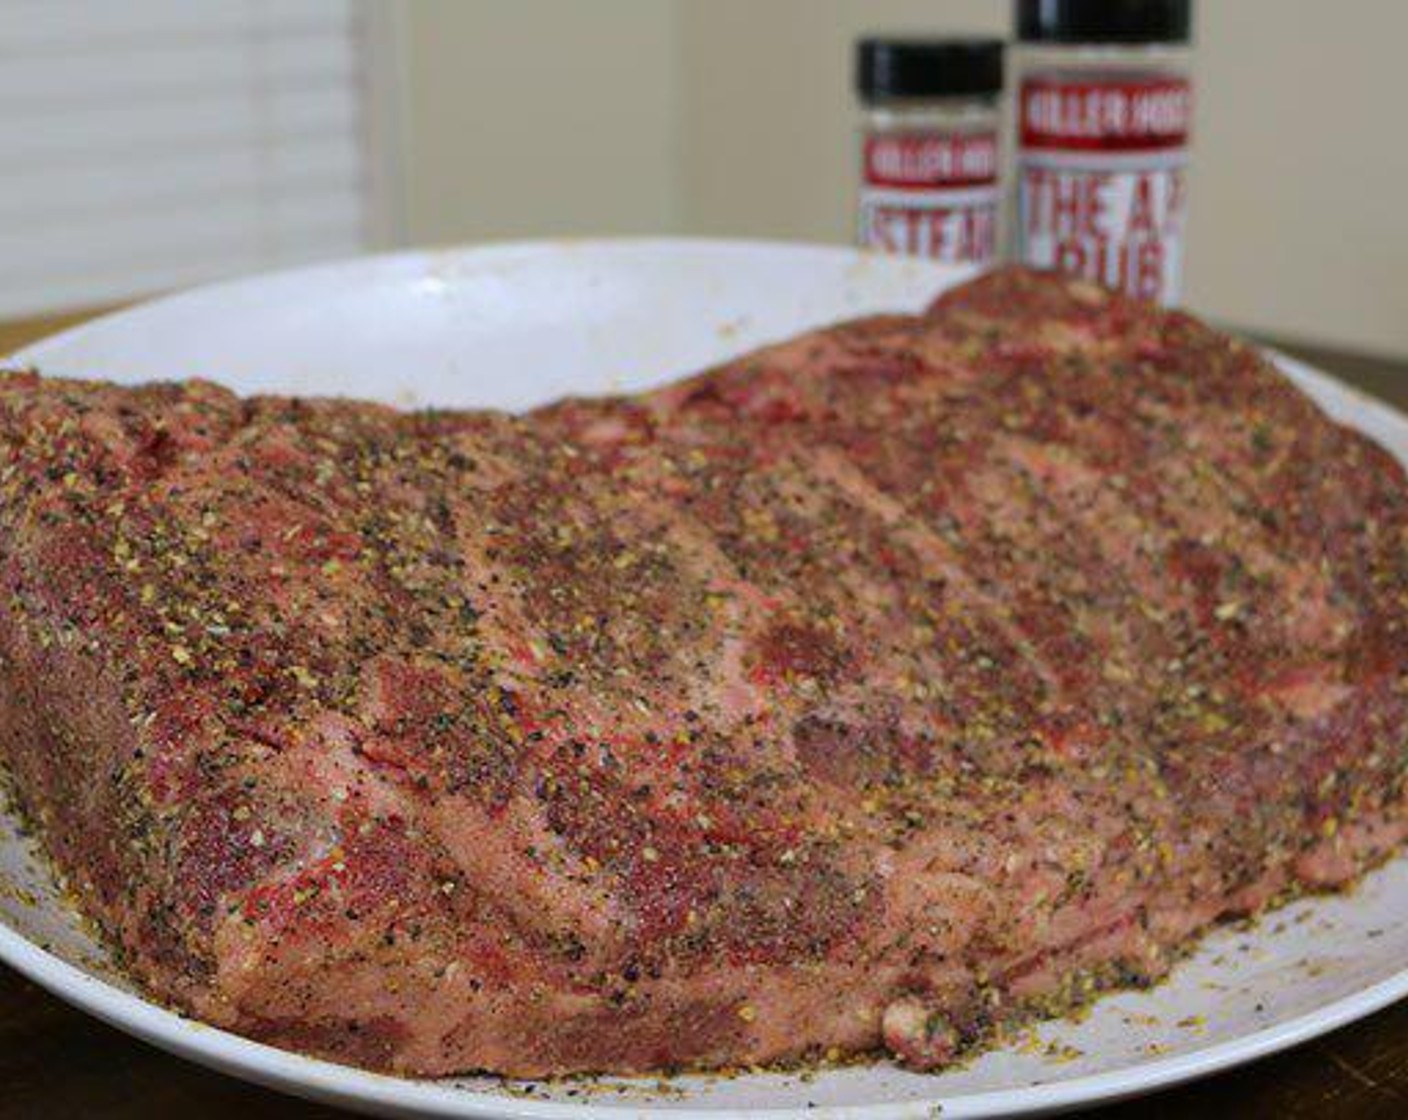 step 2 To add extra flavor and texture on the outside, layer with Steak Spice Rub (to taste). Let the Smoked New York Strip Loin rest for at least 1 hour after seasoning. This gives the salt and spices ample time to work into the meat.